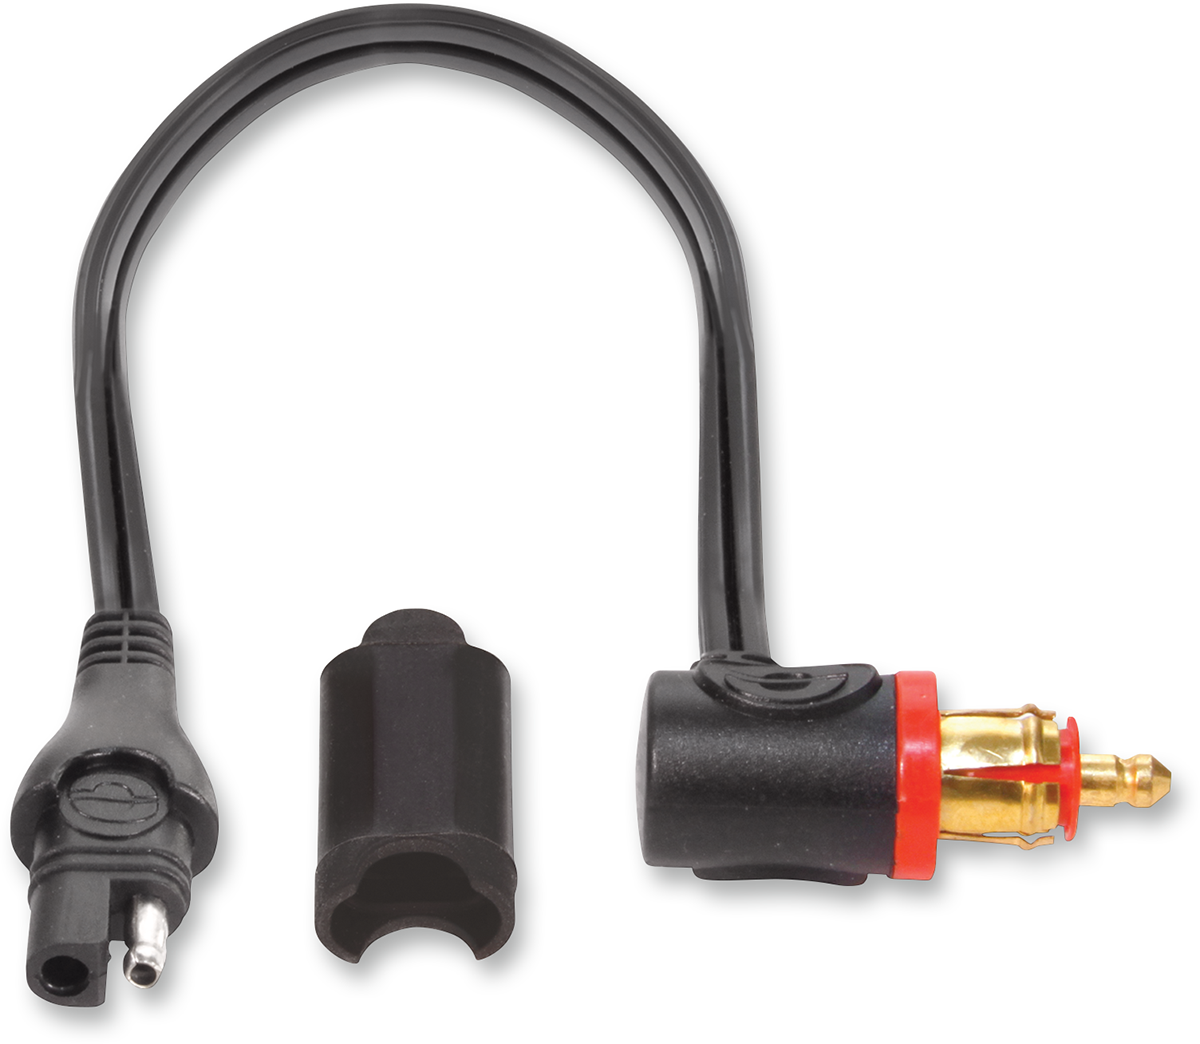 Tecmate Optimate Motorcycle 12" Black DIN & SAE Battery Charging Cable Plug